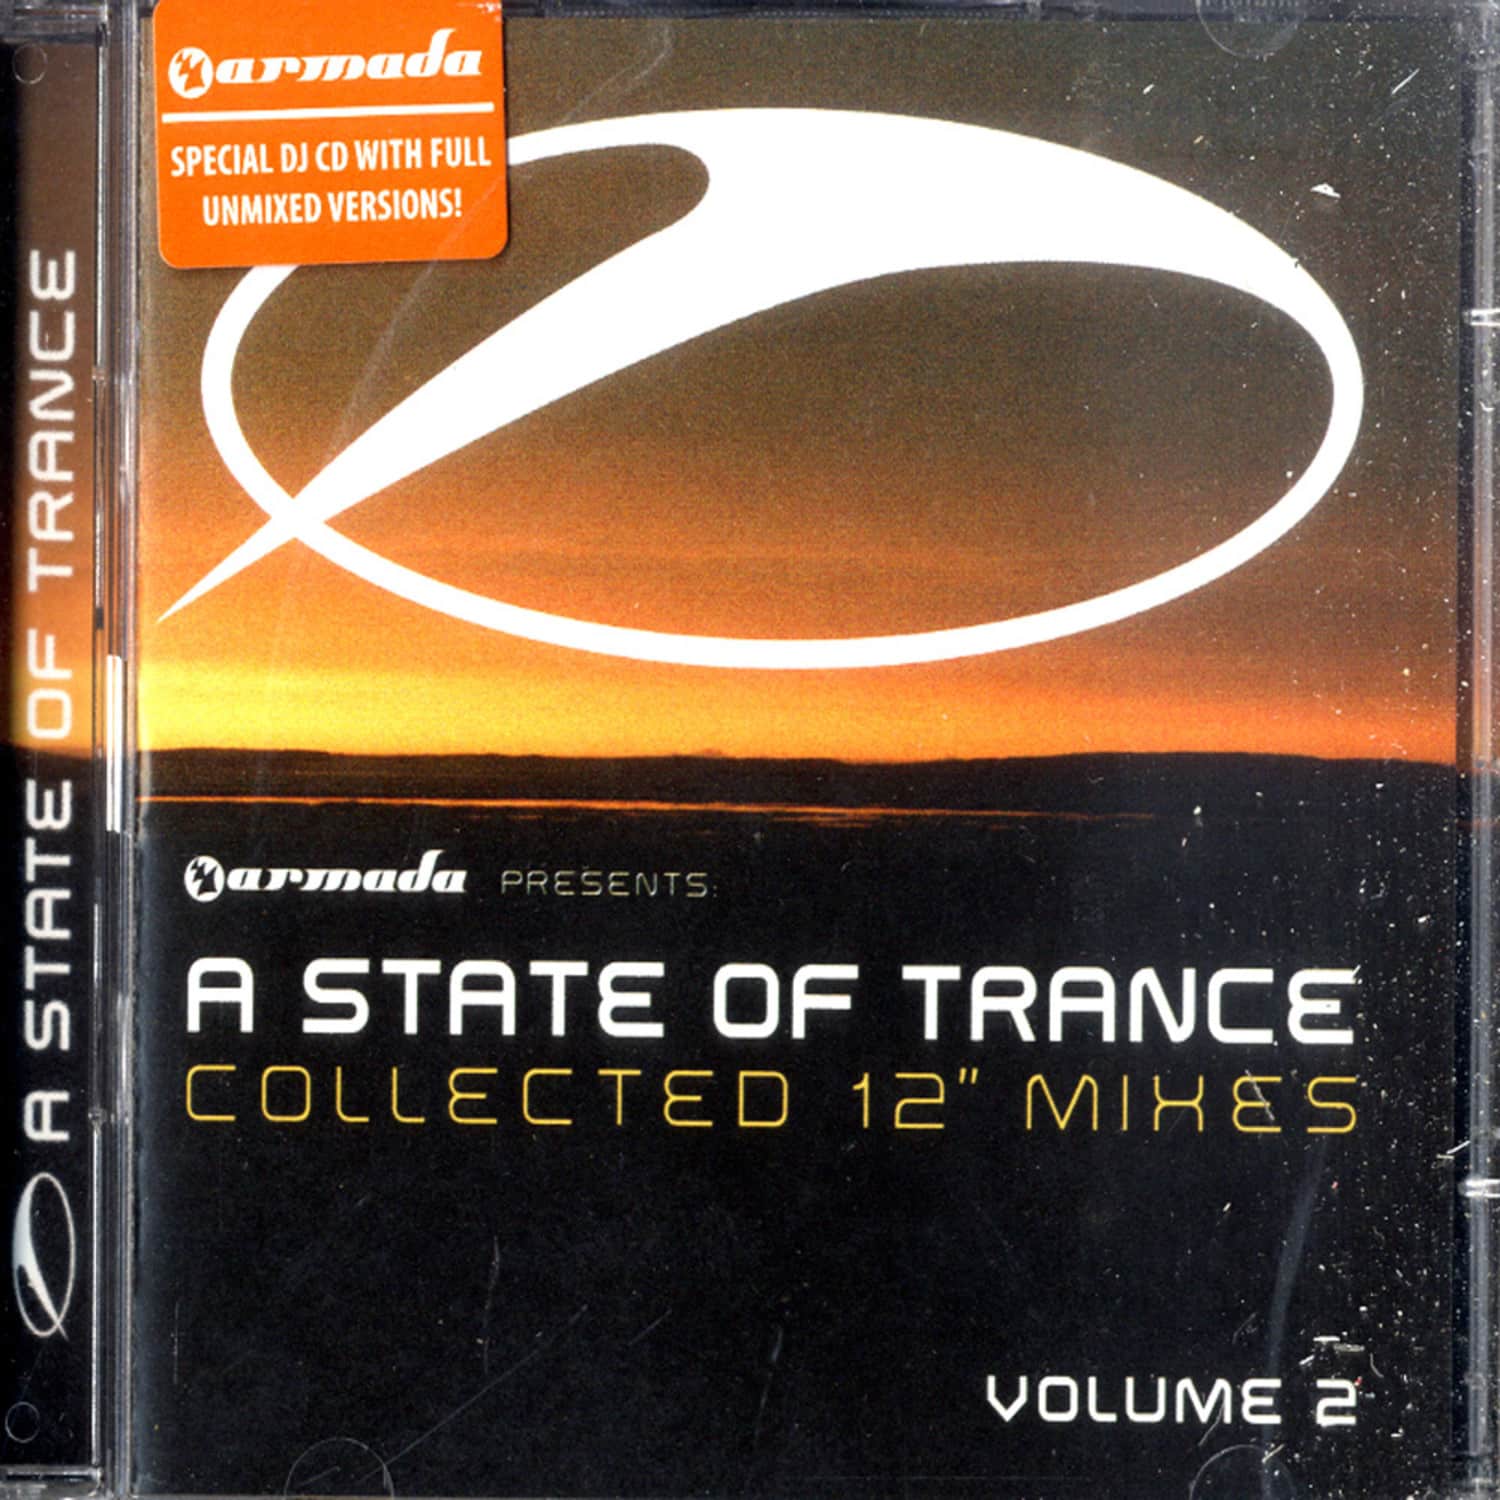 V/A - A STATE OF TRANCE COLLECTED VOL. 2 